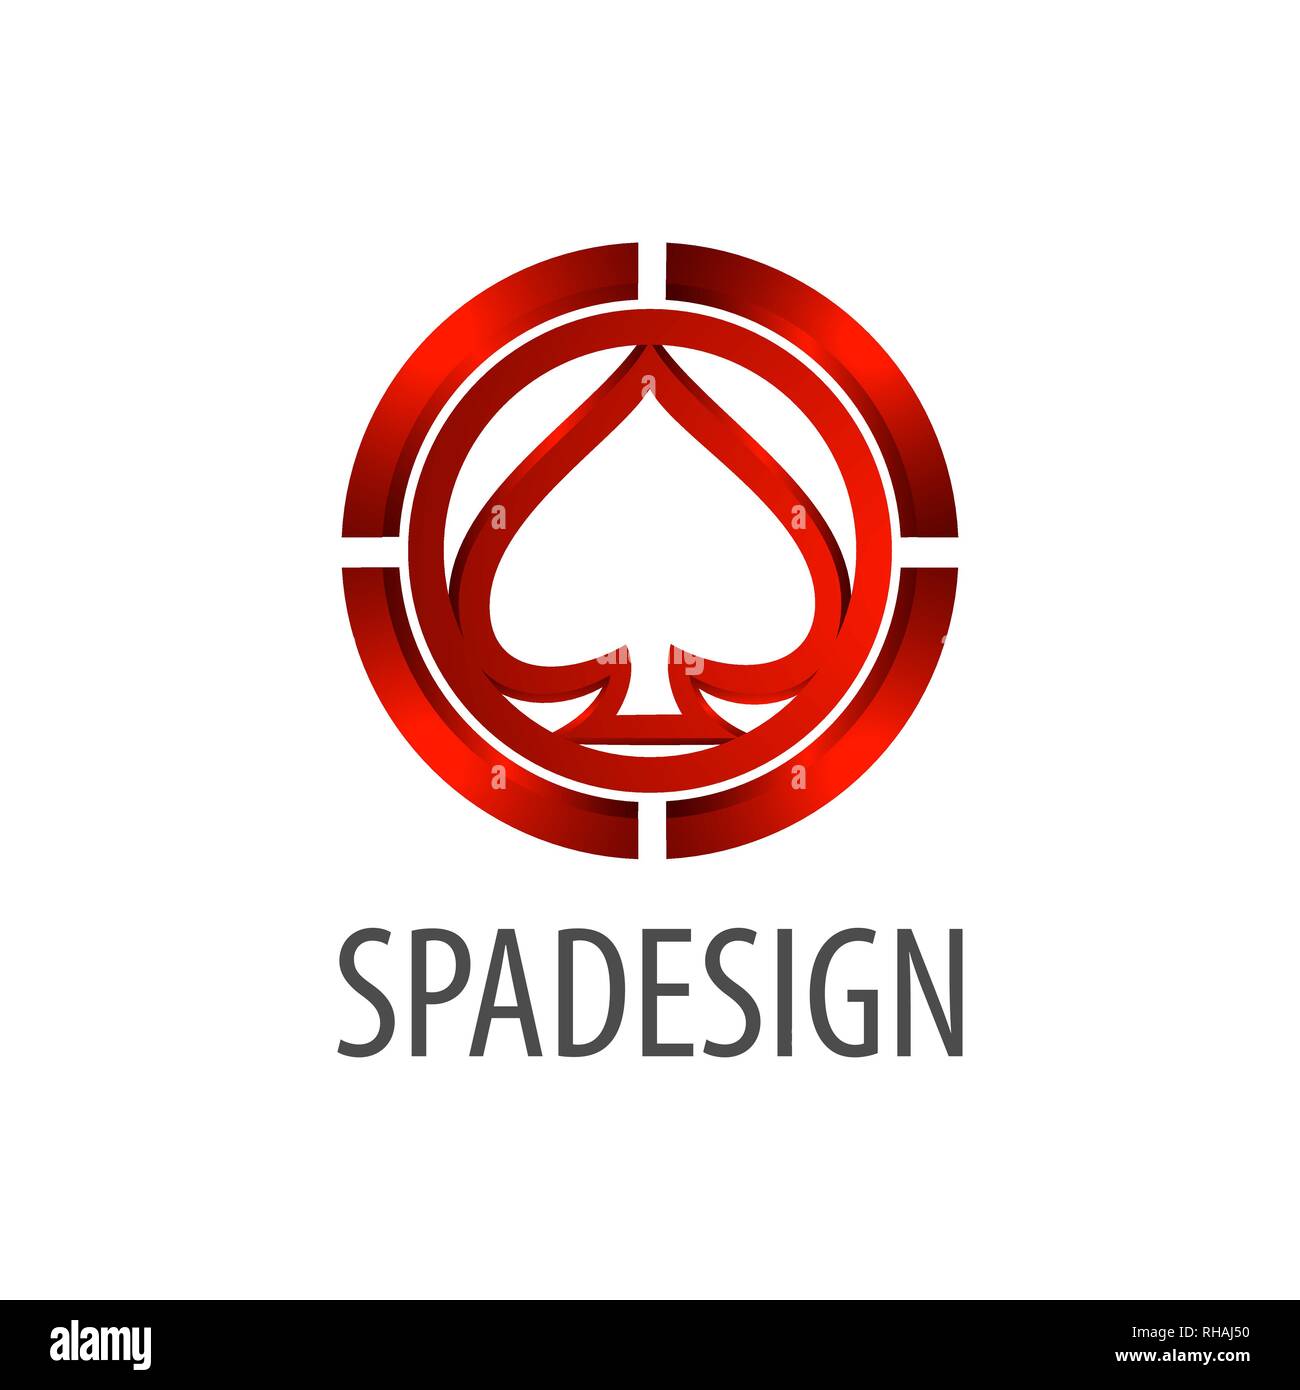 Spade sign logo concept design. 3D three dimensional style. Symbol graphic template element vector Stock Vector